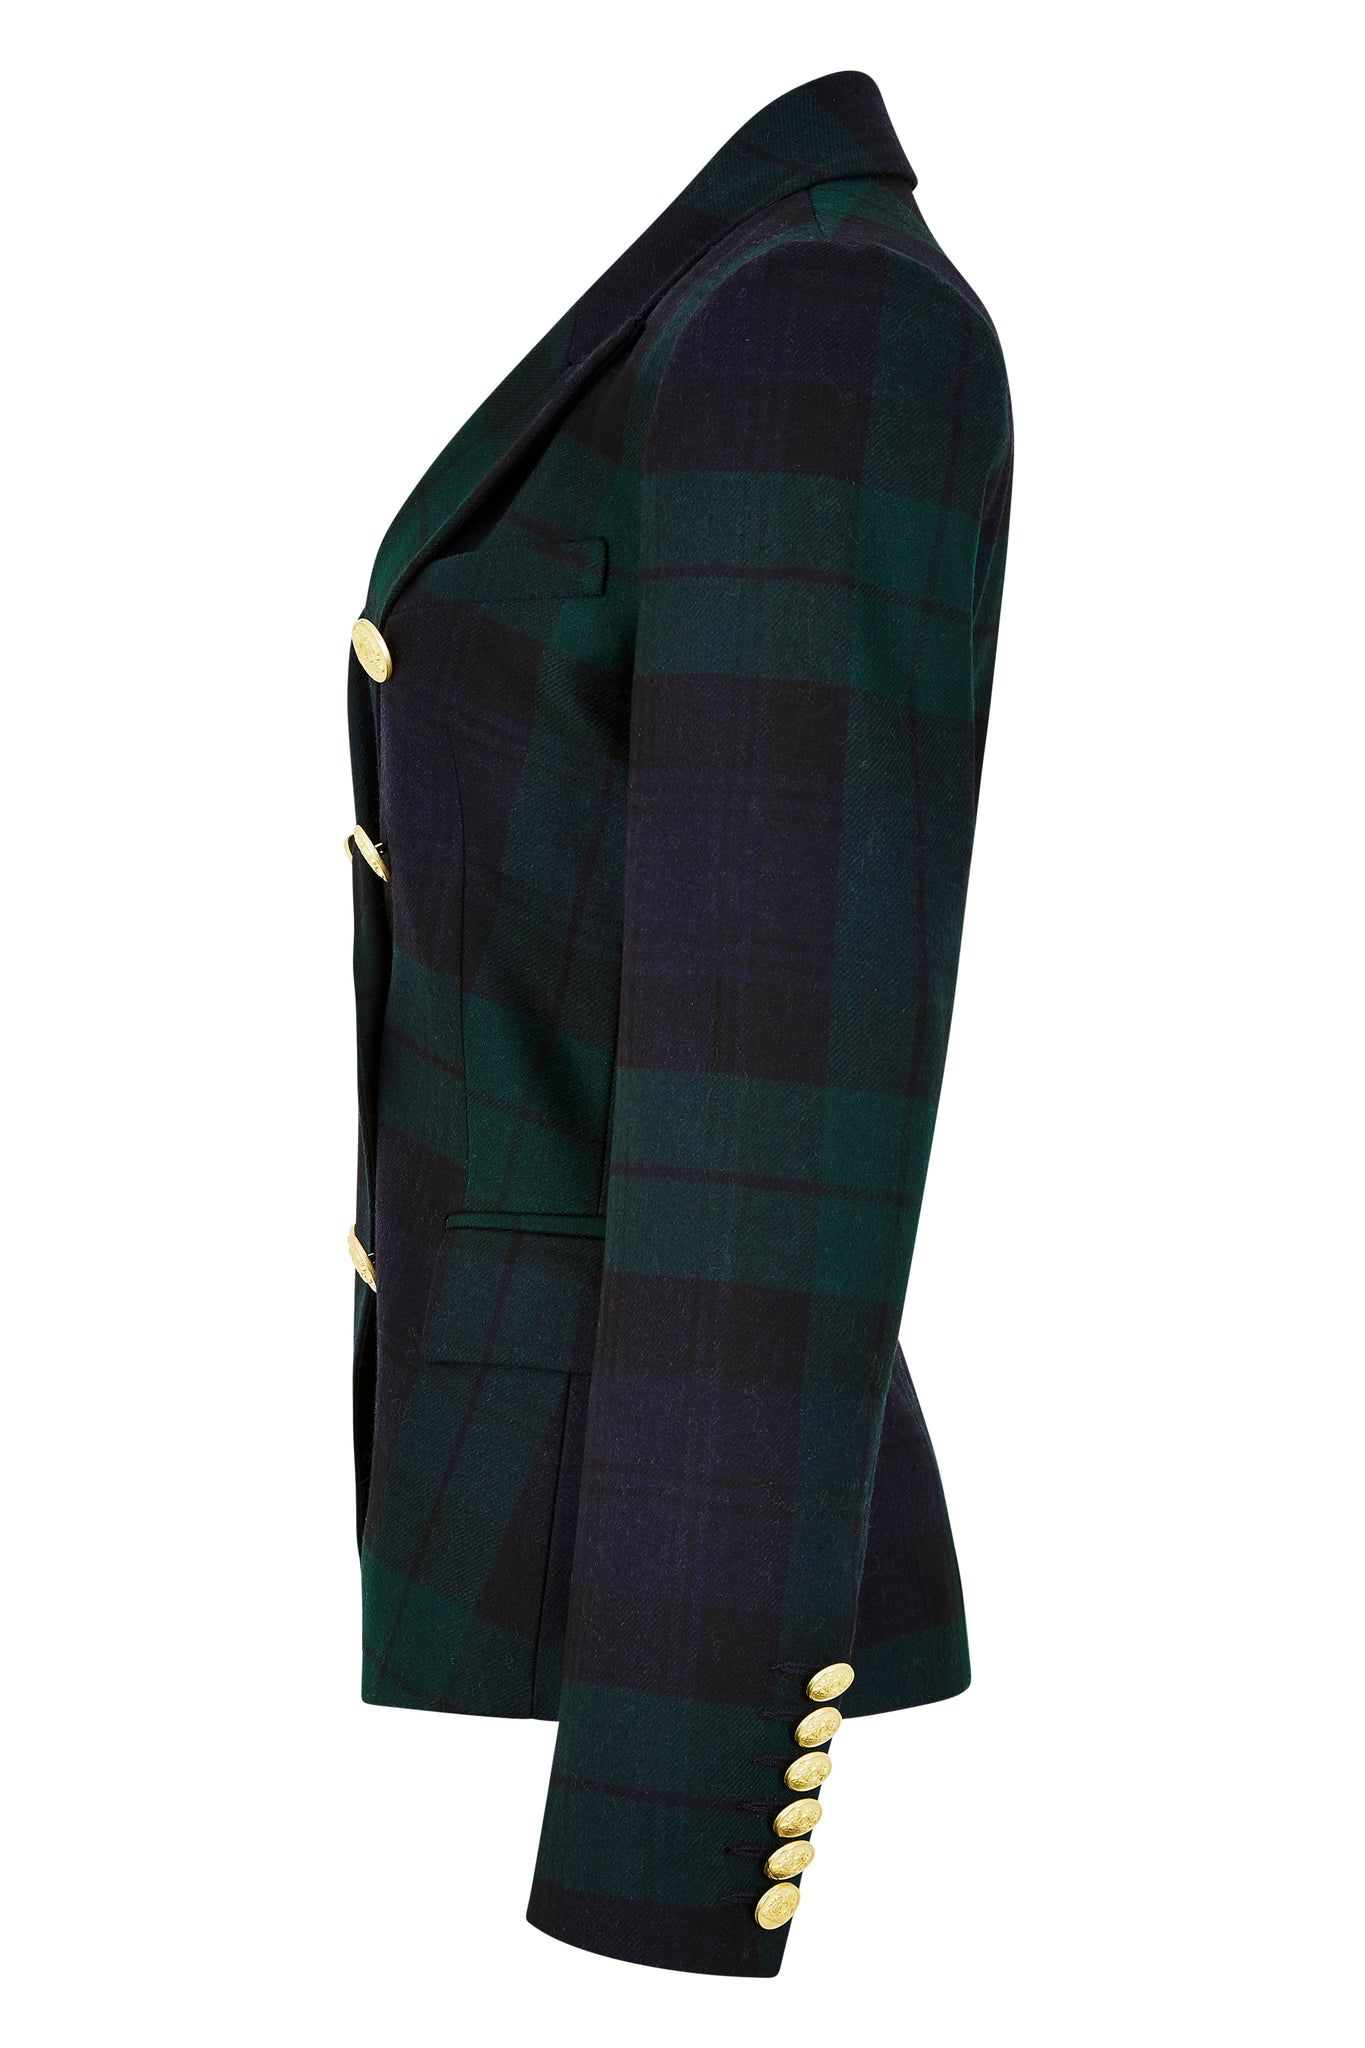 side of British made double breasted blazer that fastens with a single button hole to create a more form fitting silhouette with two pockets and gold button detailing this blazer is made from navy and green blackwatch tartan